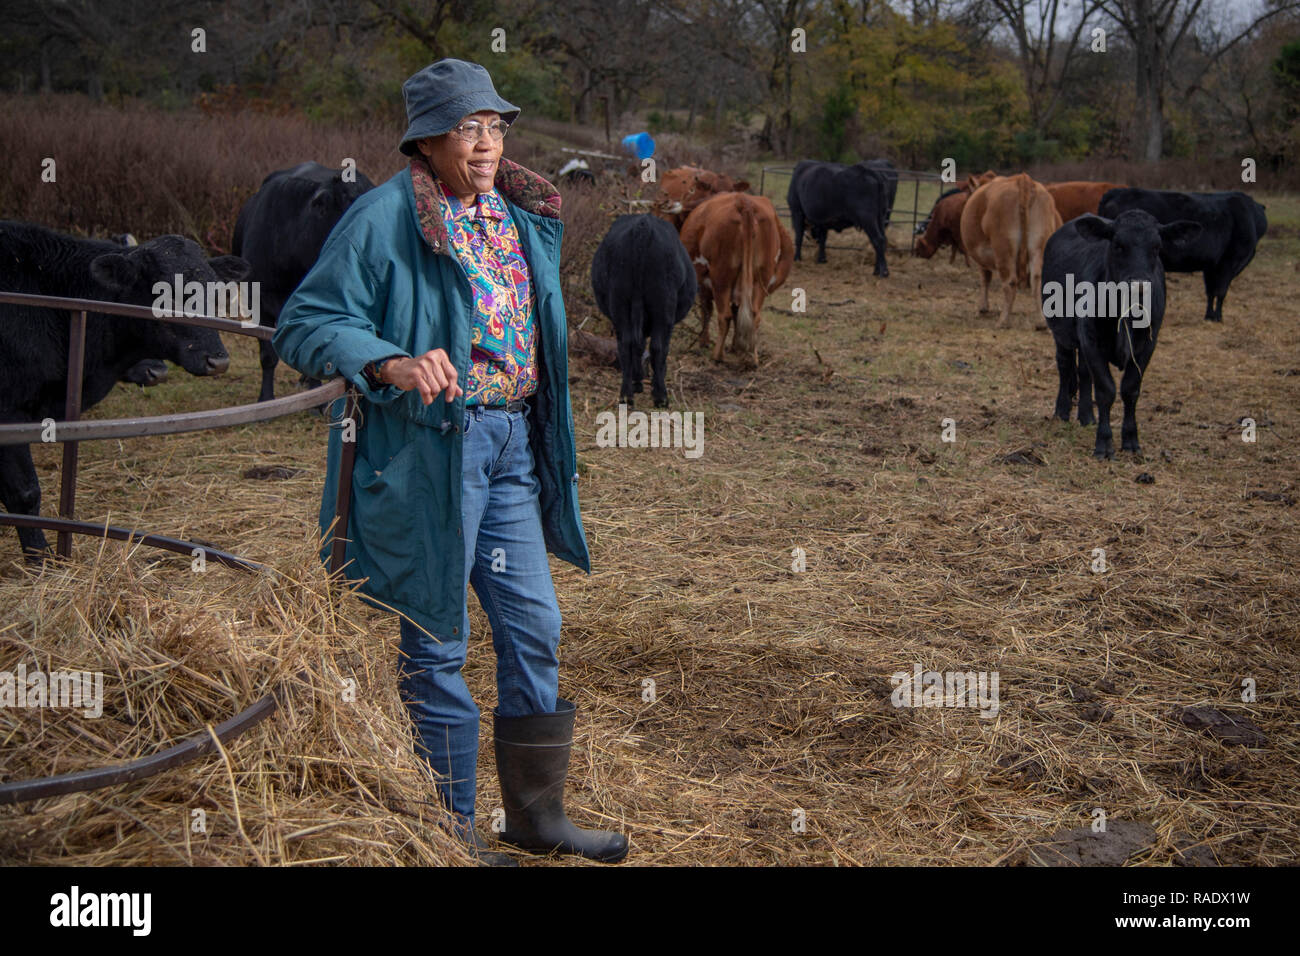 Pat Crenshaw, 79, a black Native American, who owns and operates 120 acres of farmland in Slick, Oklahoma. Her father purchased the land through Farmers Home Administration in 1945, a time when it was uncommon for minorities to receive loans through the government. Having lived on the land since 1945 with her parents, she began maintaining the 120-acre ranch by herself since her father passed away in 2001. Stock Photo